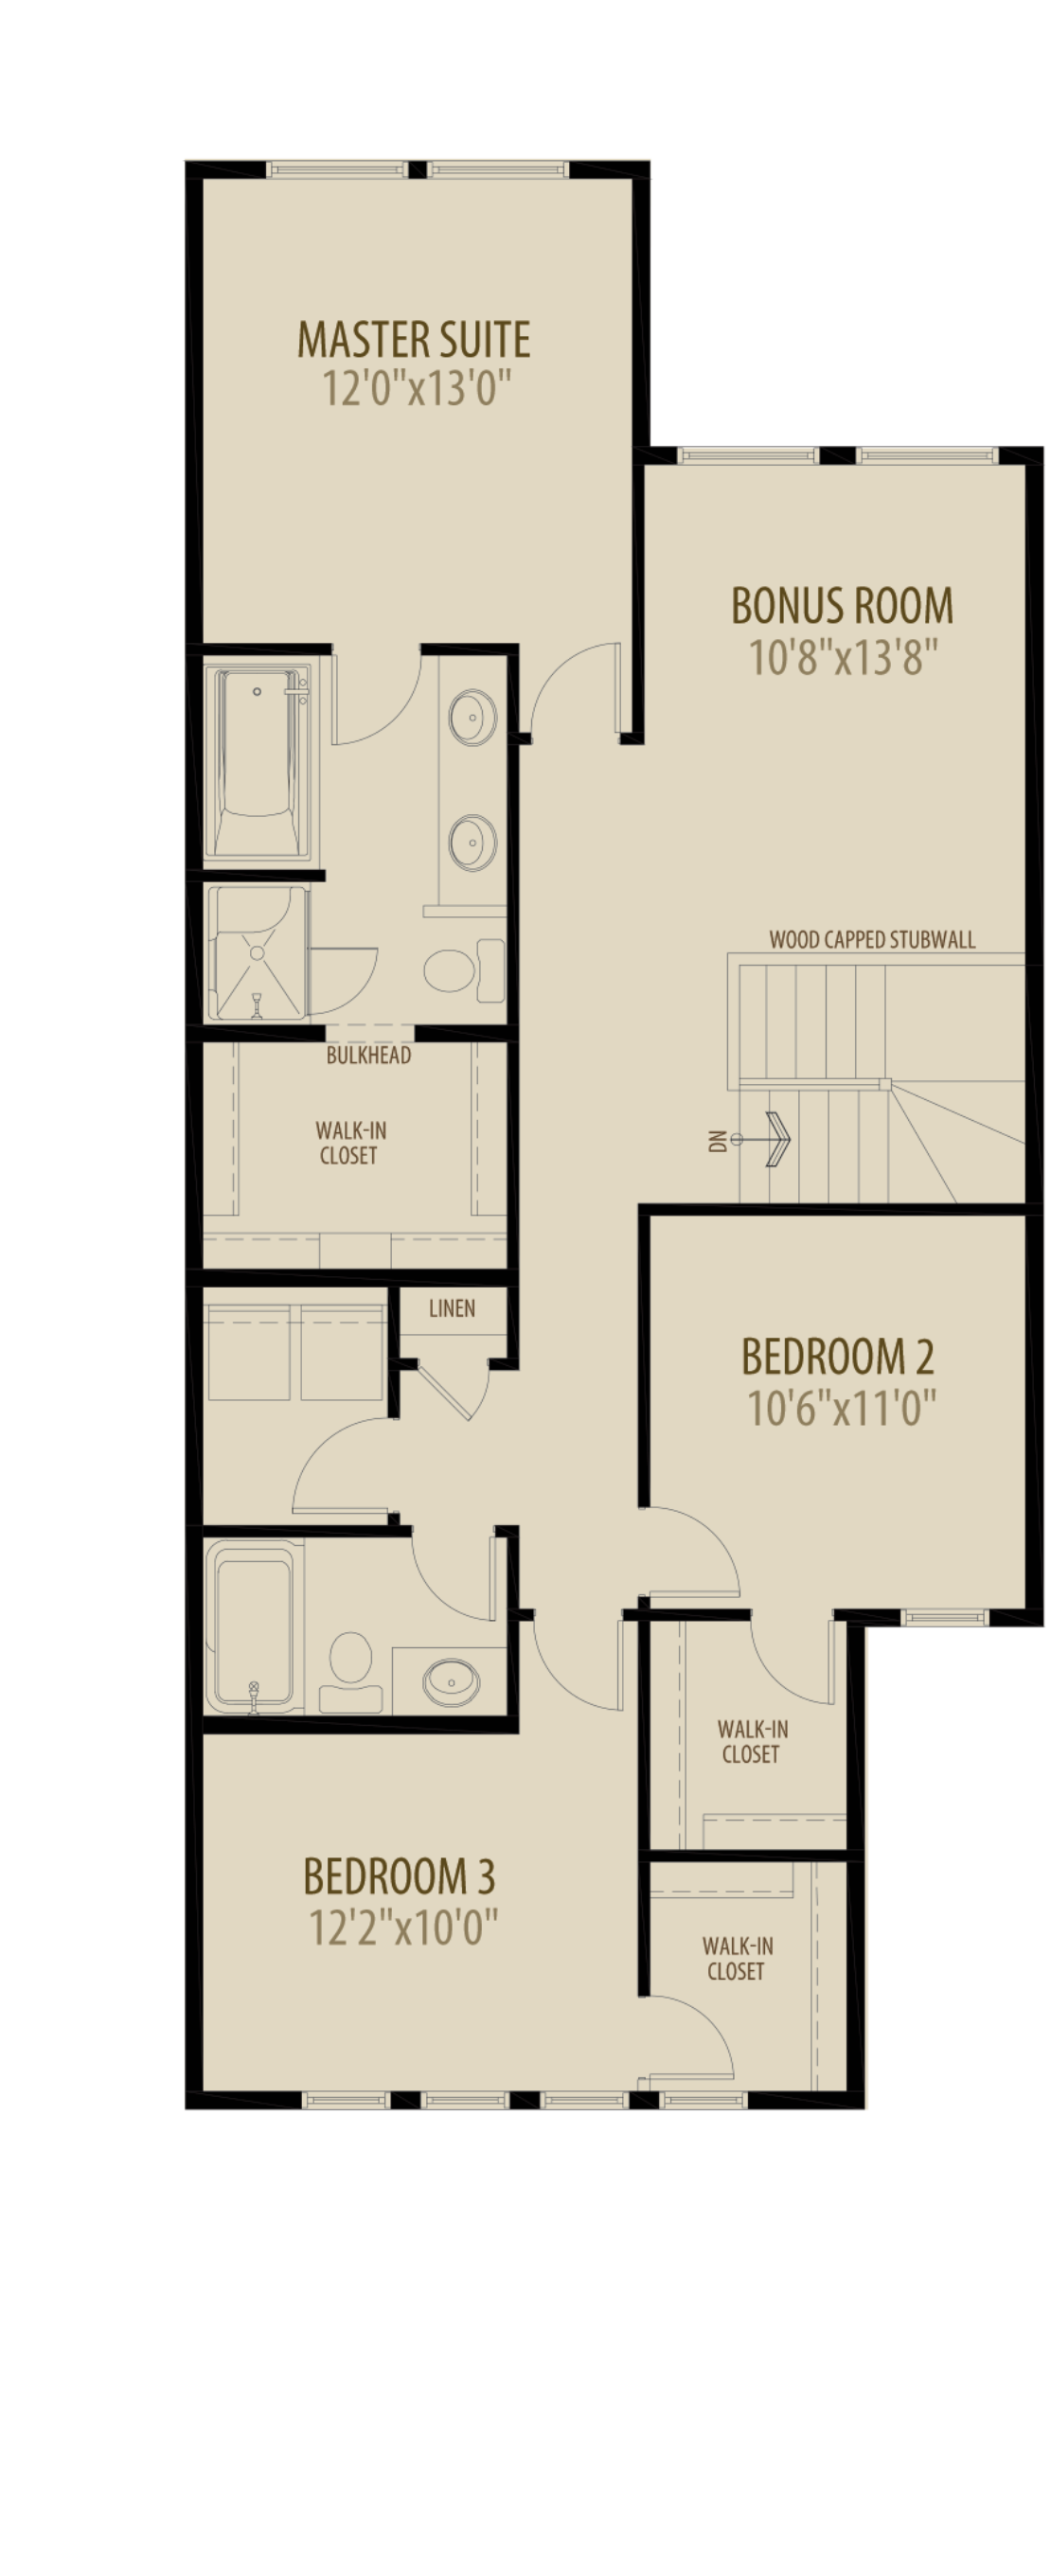 Expanded Bedrooms Adds 46 sq ft